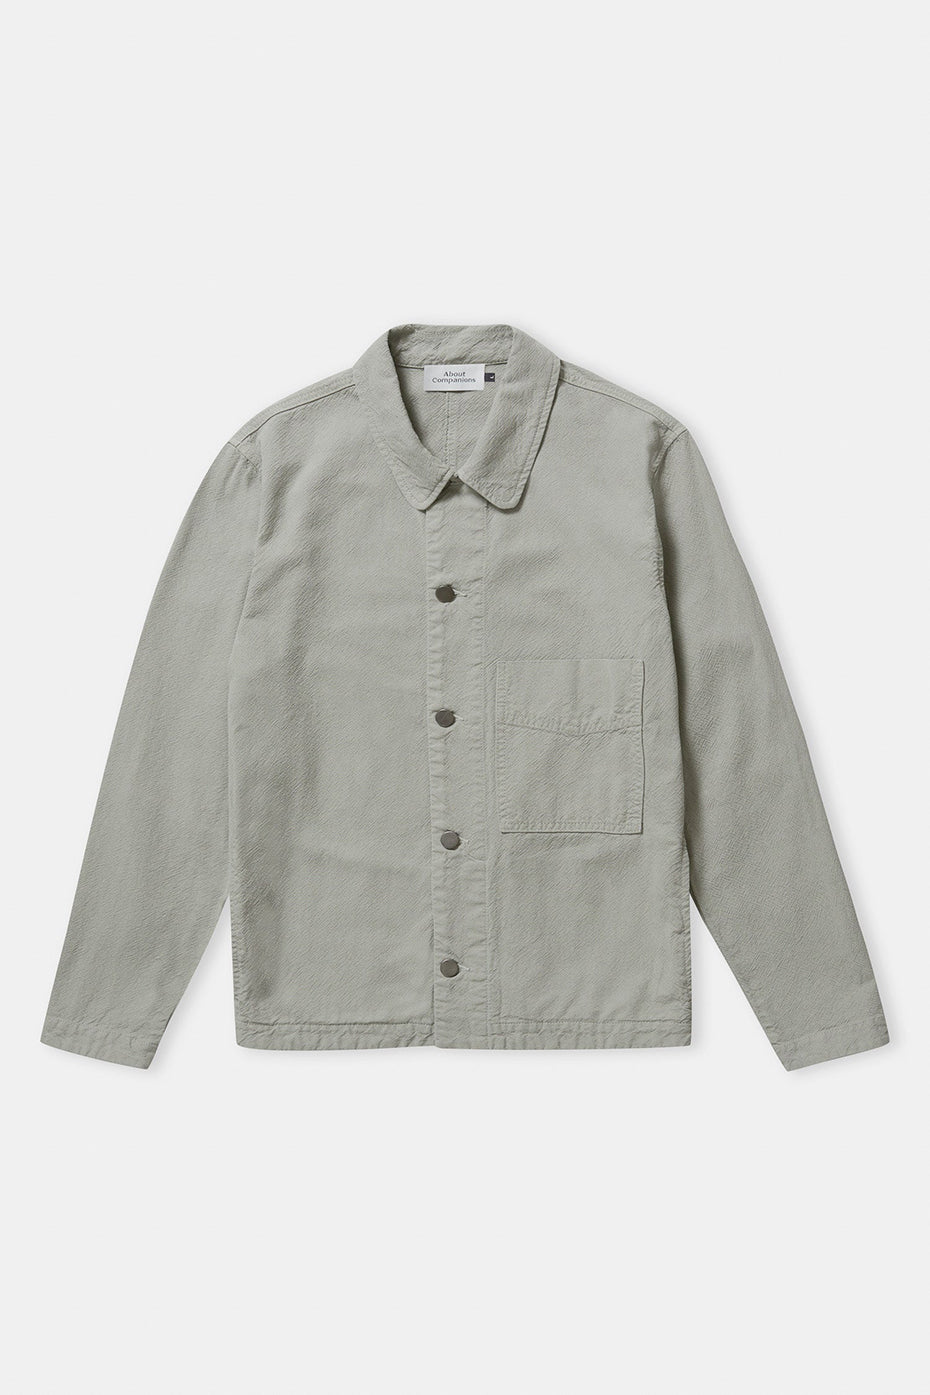 About Companions Eco Canvas Reed Asir Jacket